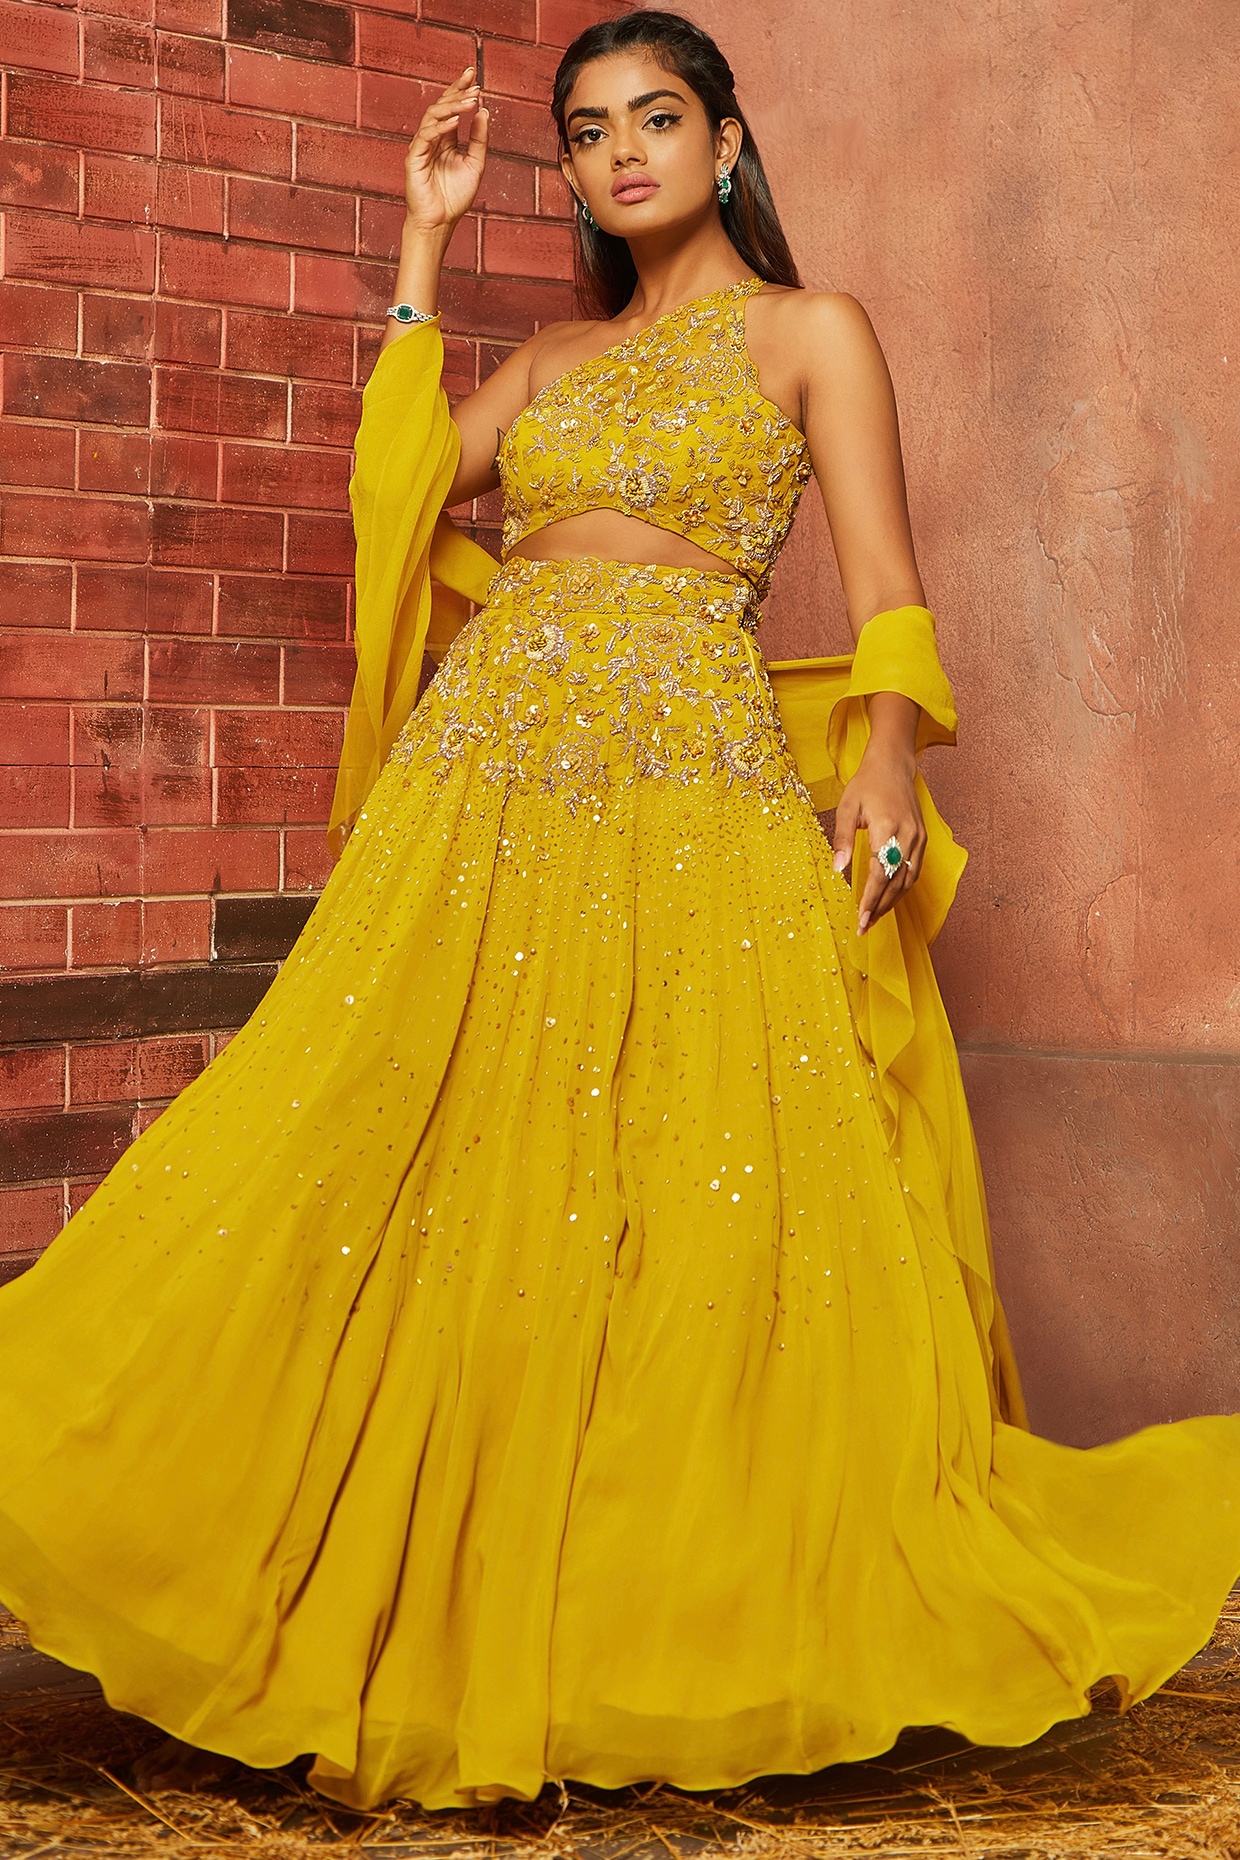 Best Lehenga Blouse Designs for Stunning Indian Outfits